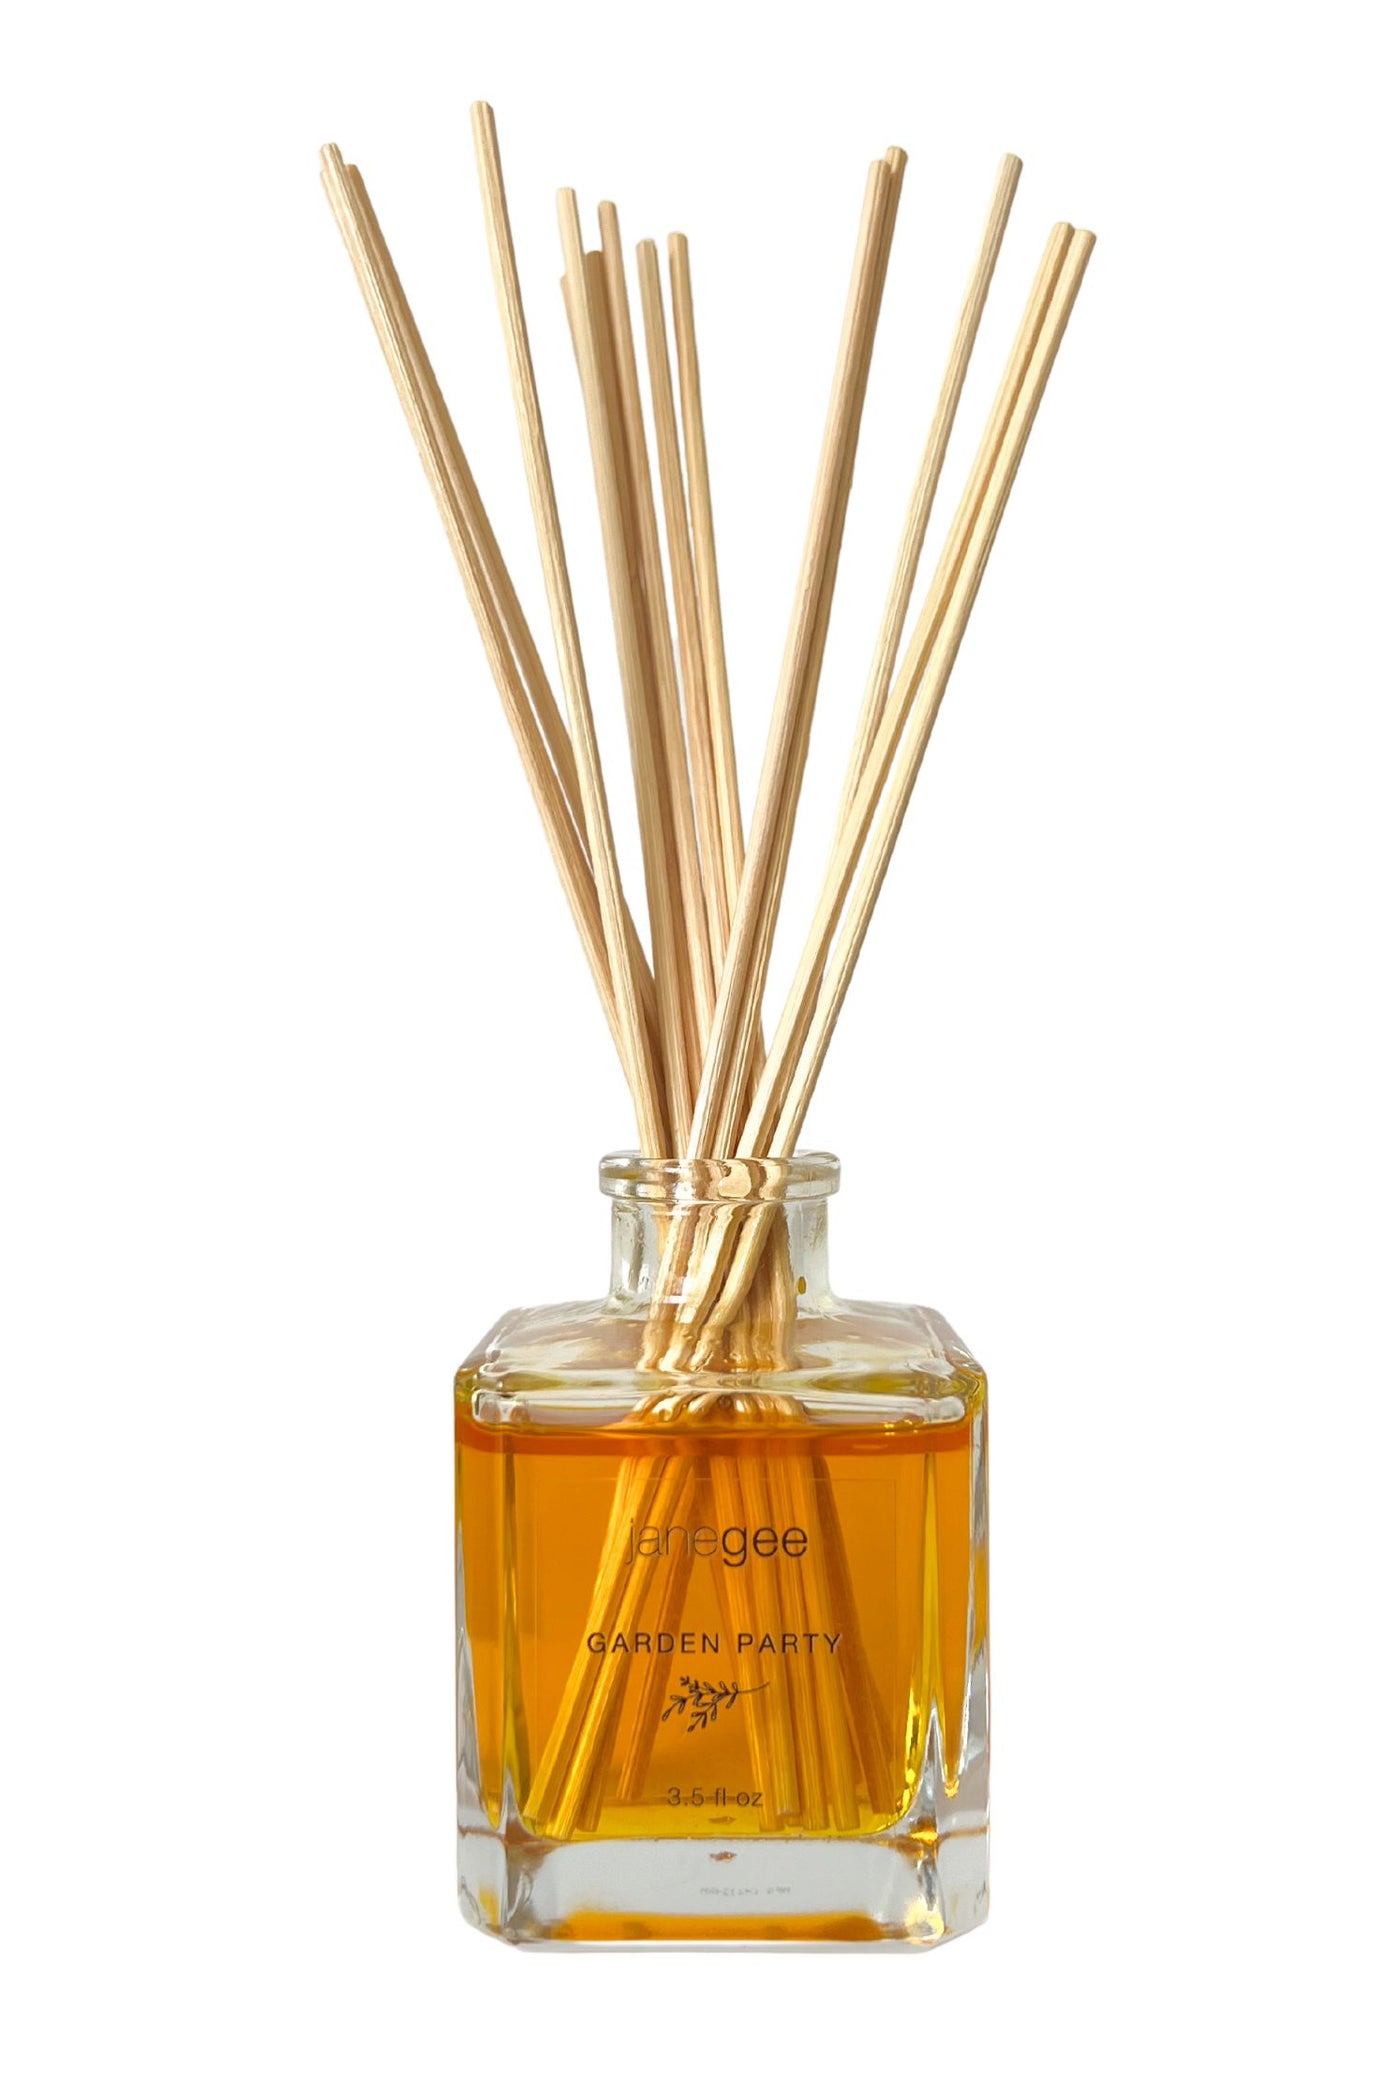 janegee Garden Party Reed Diffuser